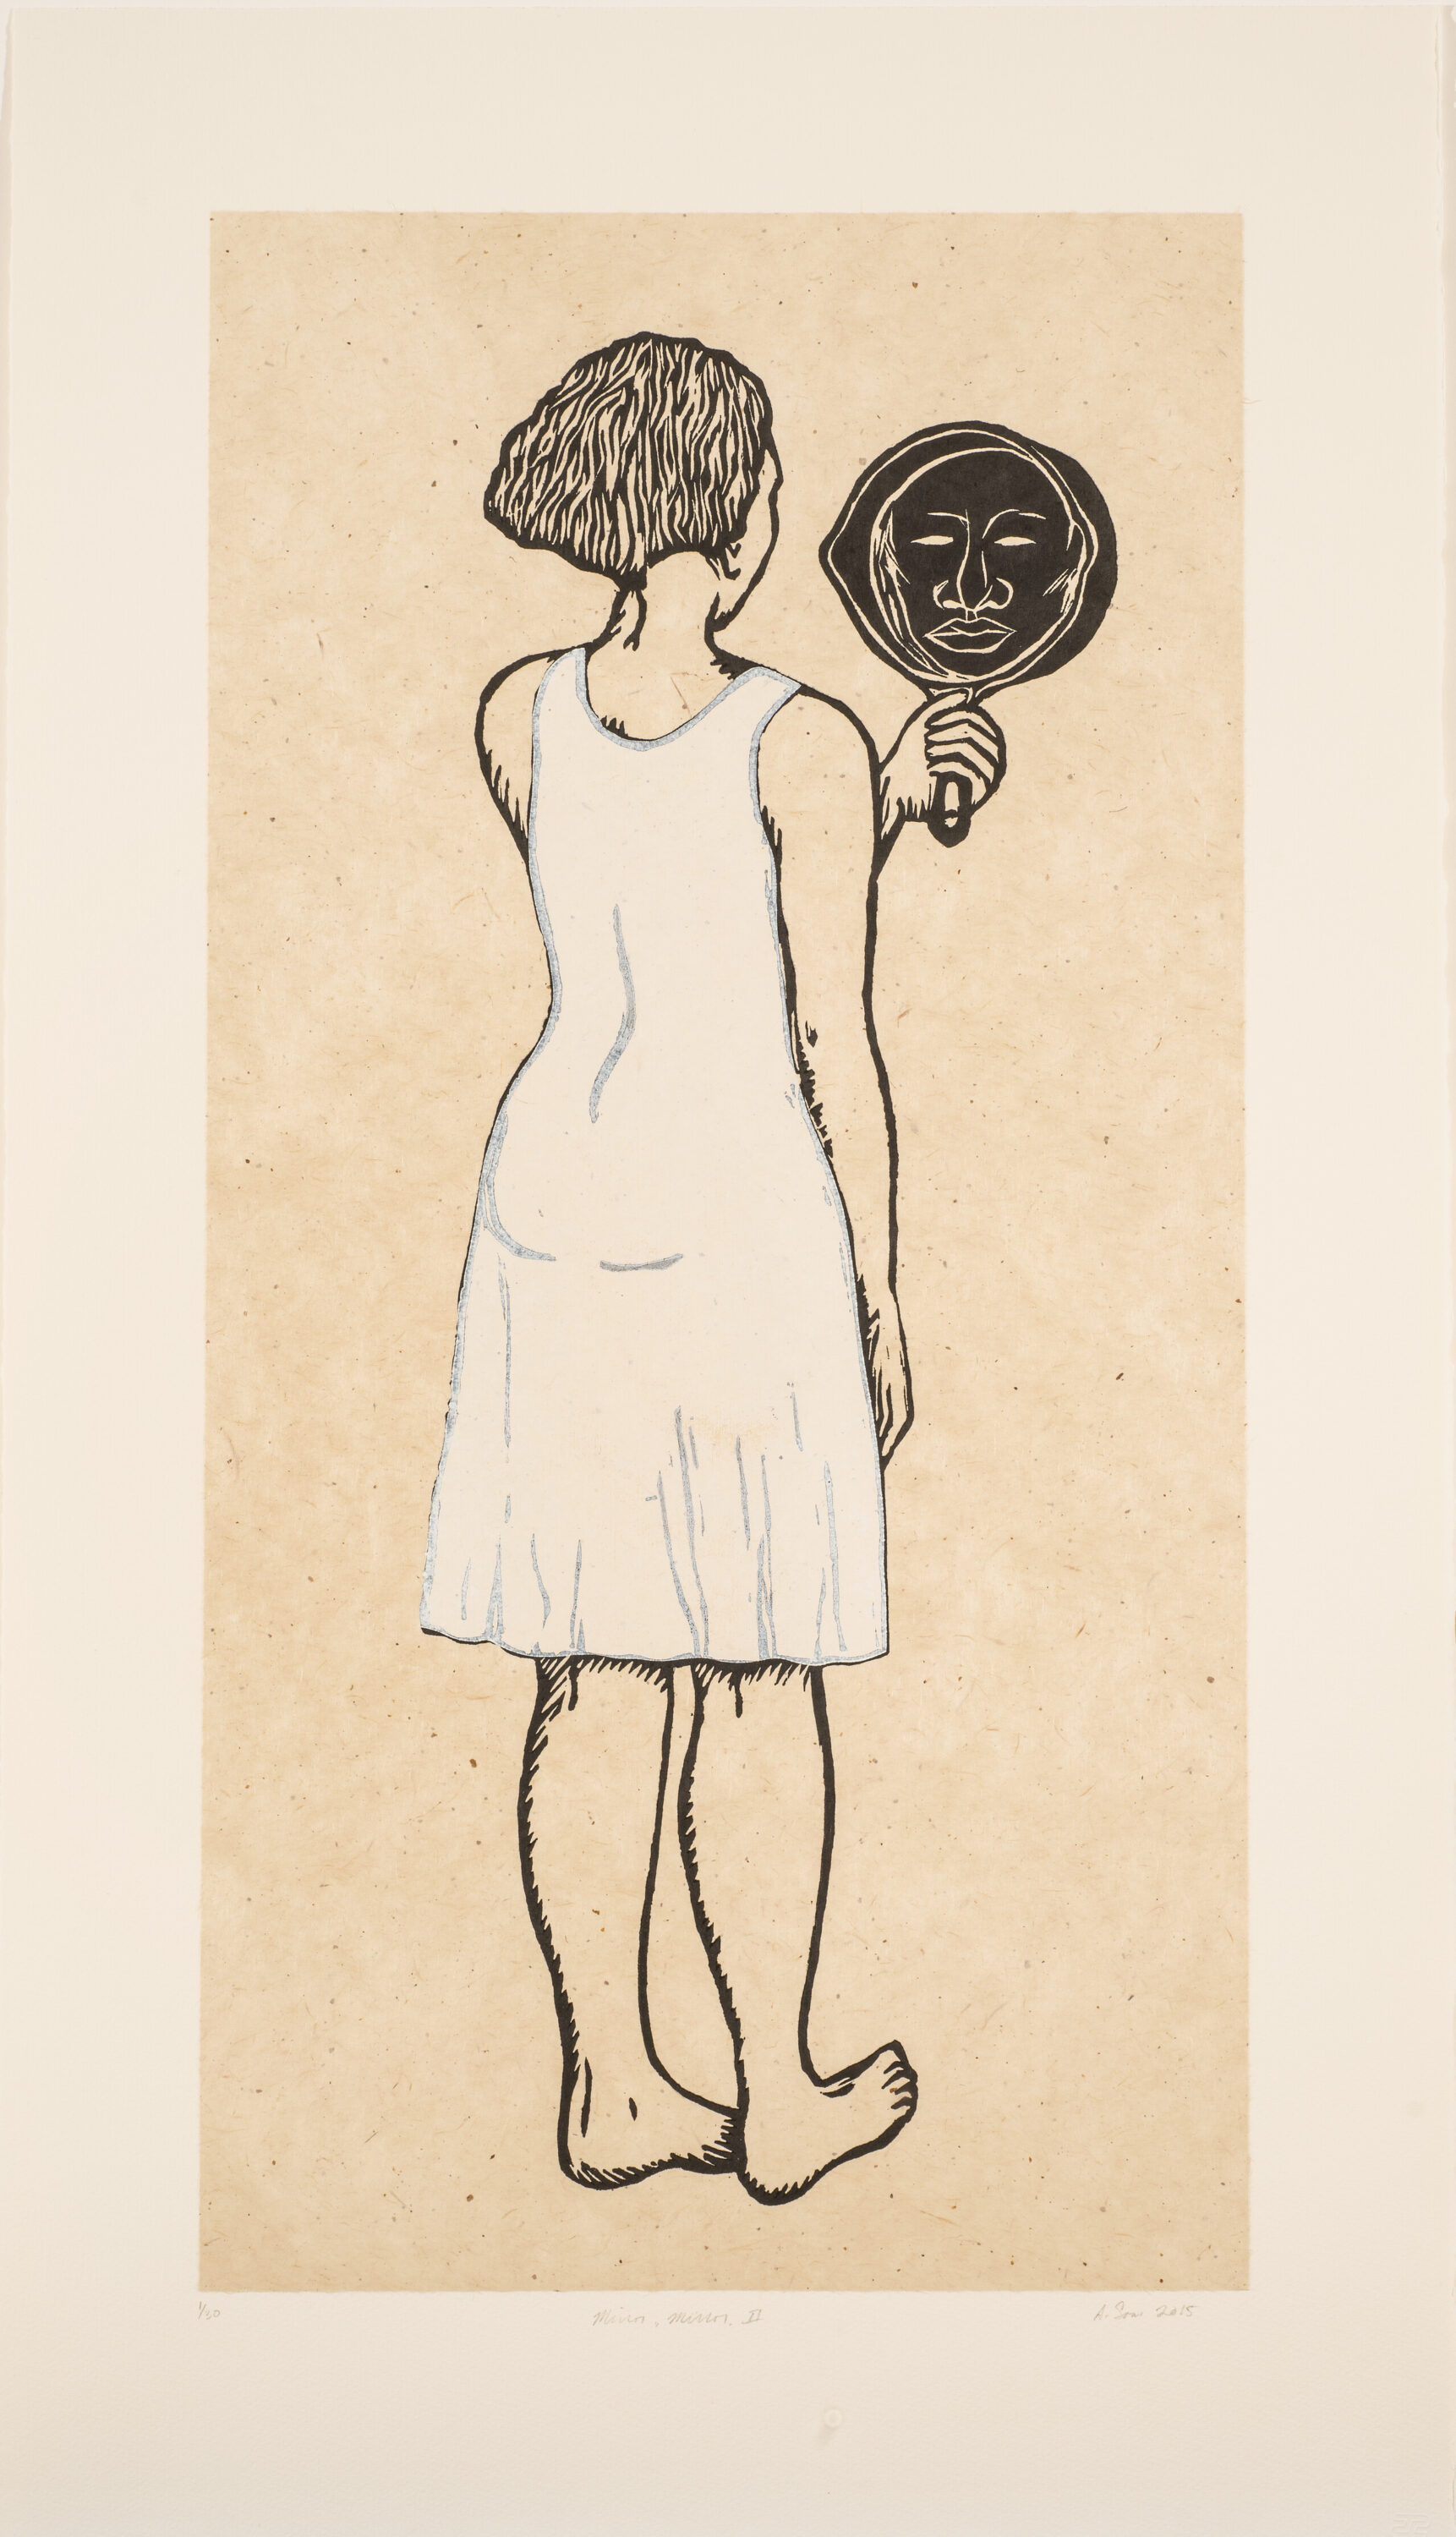 A tall, rectangular print of black lines on a peachy background, framed with a thick, off-white border. The print depicts a woman from behind with chin-length hair in a sheer, white, sleeveless, knee-length dress. She holds a cast-iron pan up like a mirror, gazing at a face in the pan.